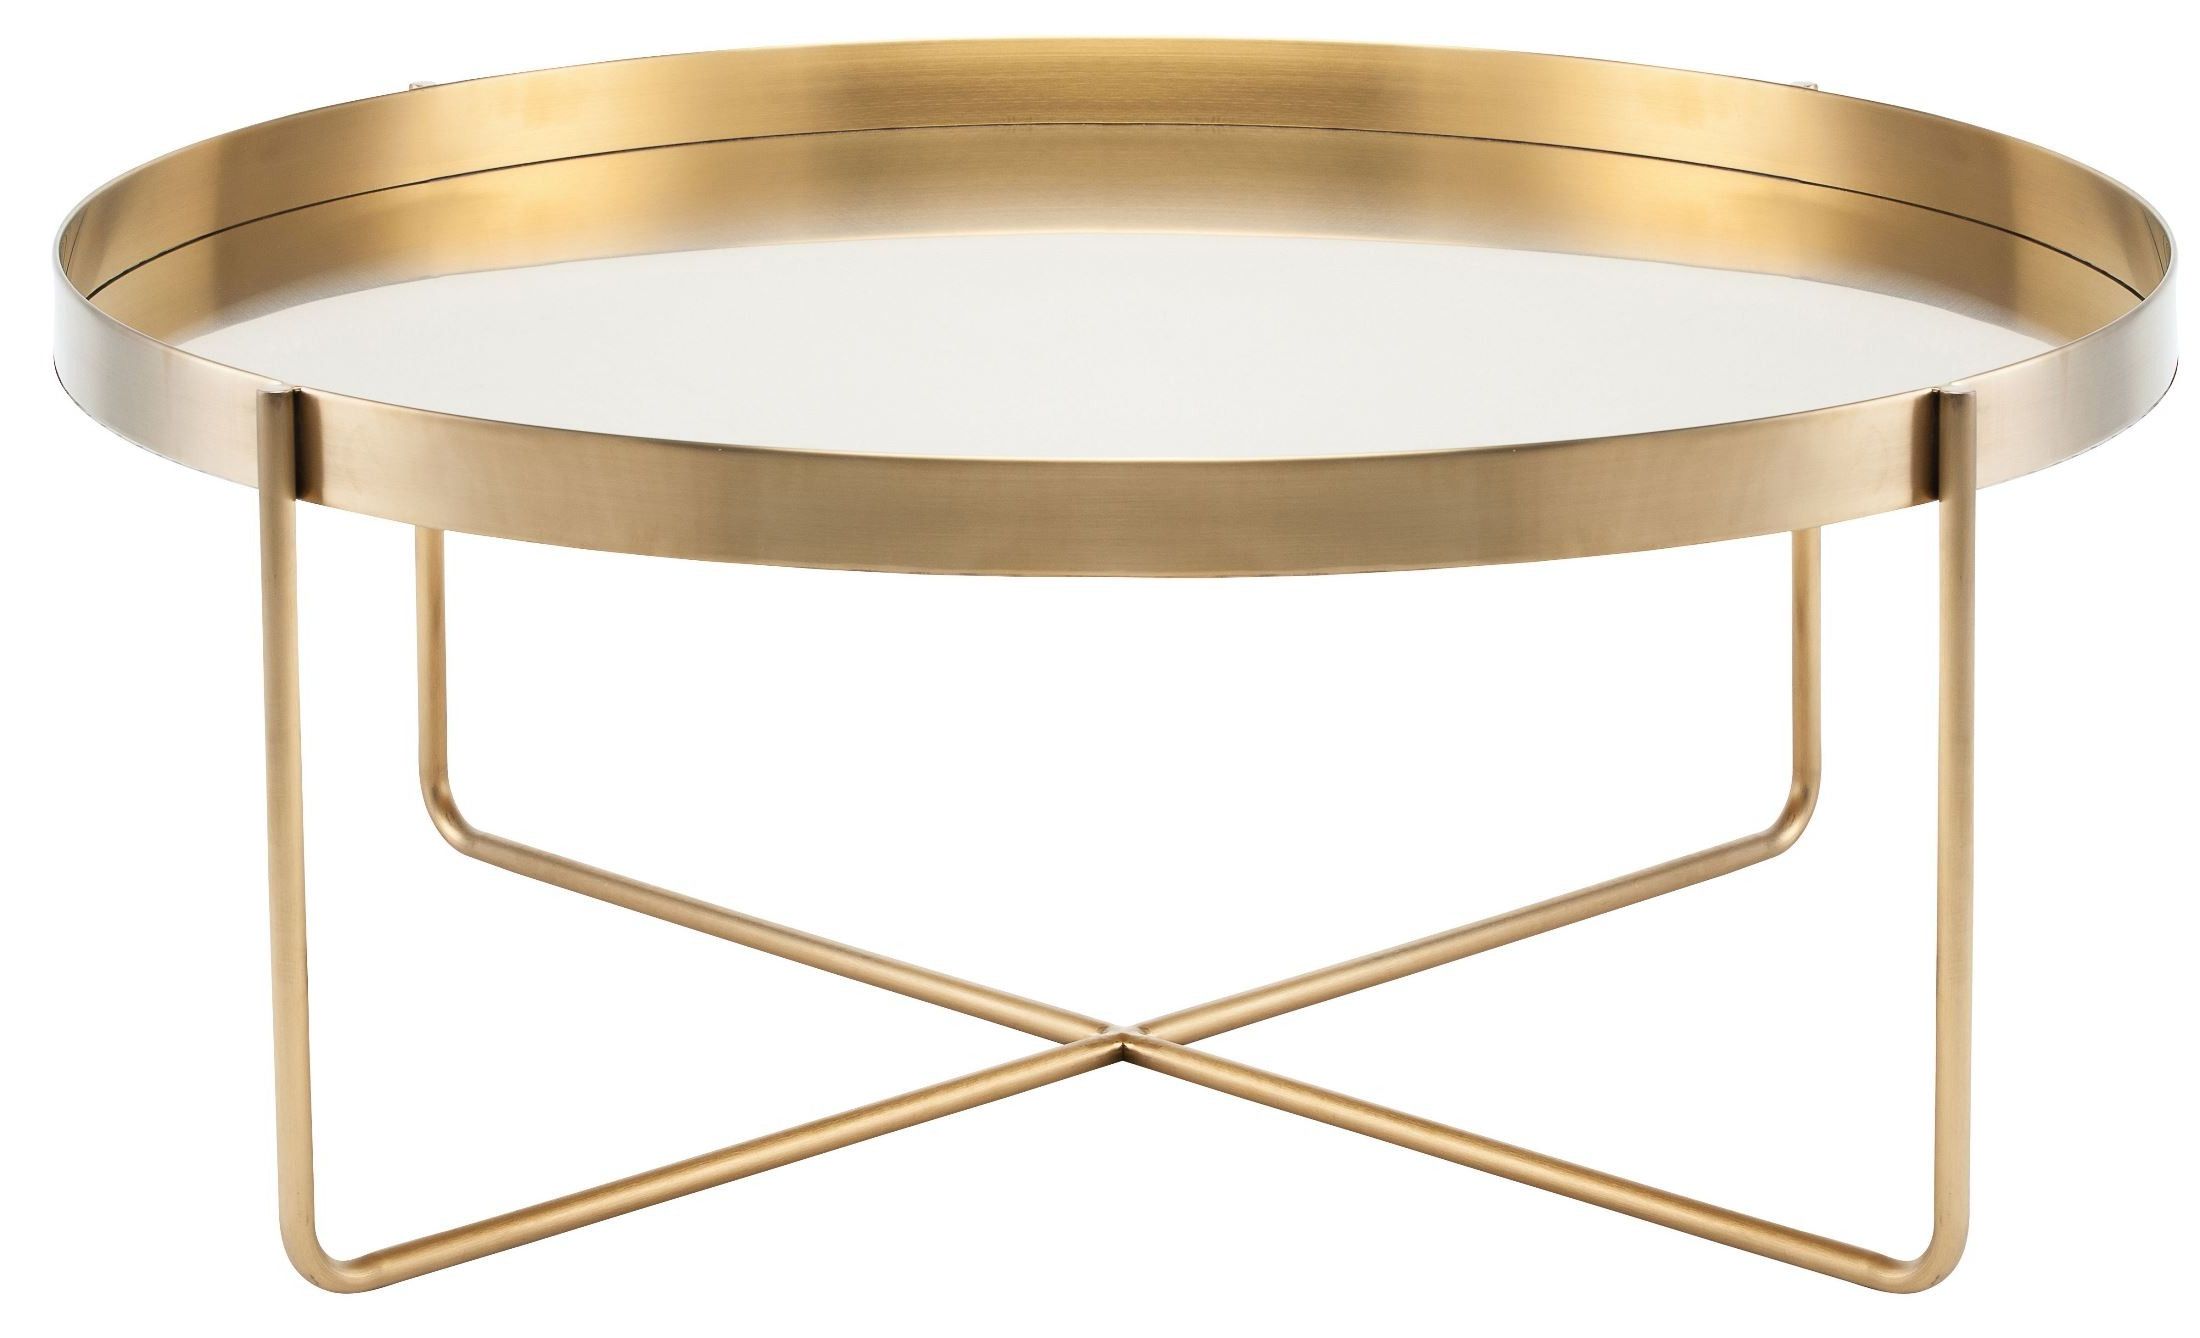 Gaultier 40" Gold Metal Coffee Table, Hgde122, Nuevo With 2020 Antique Gold Aluminum Coffee Tables (View 9 of 20)